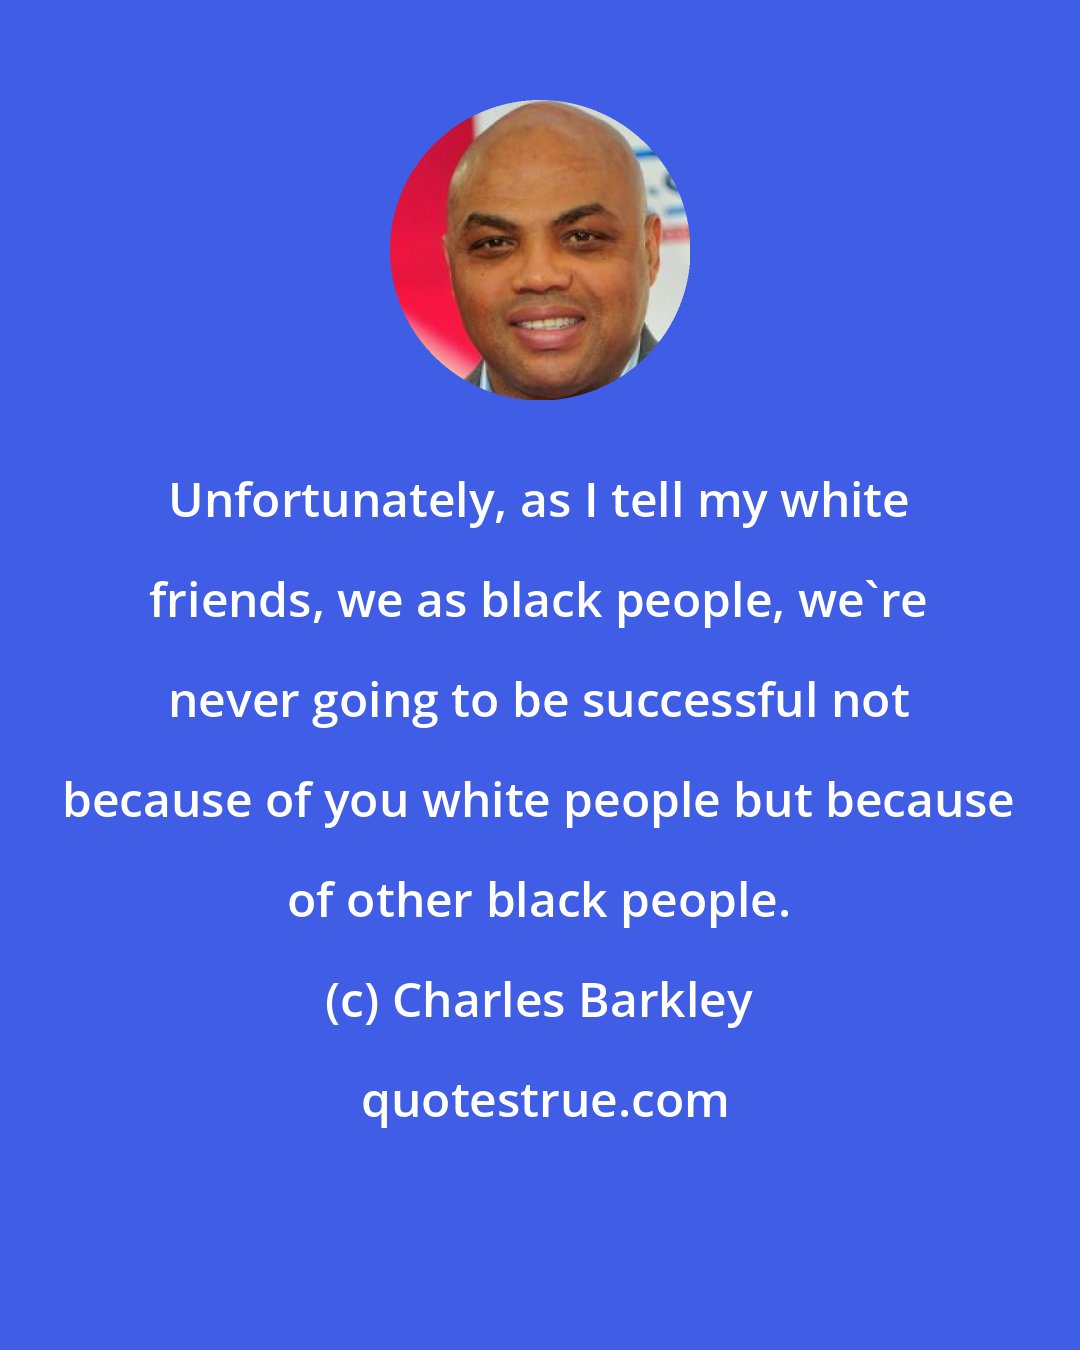 Charles Barkley: Unfortunately, as I tell my white friends, we as black people, we're never going to be successful not because of you white people but because of other black people.